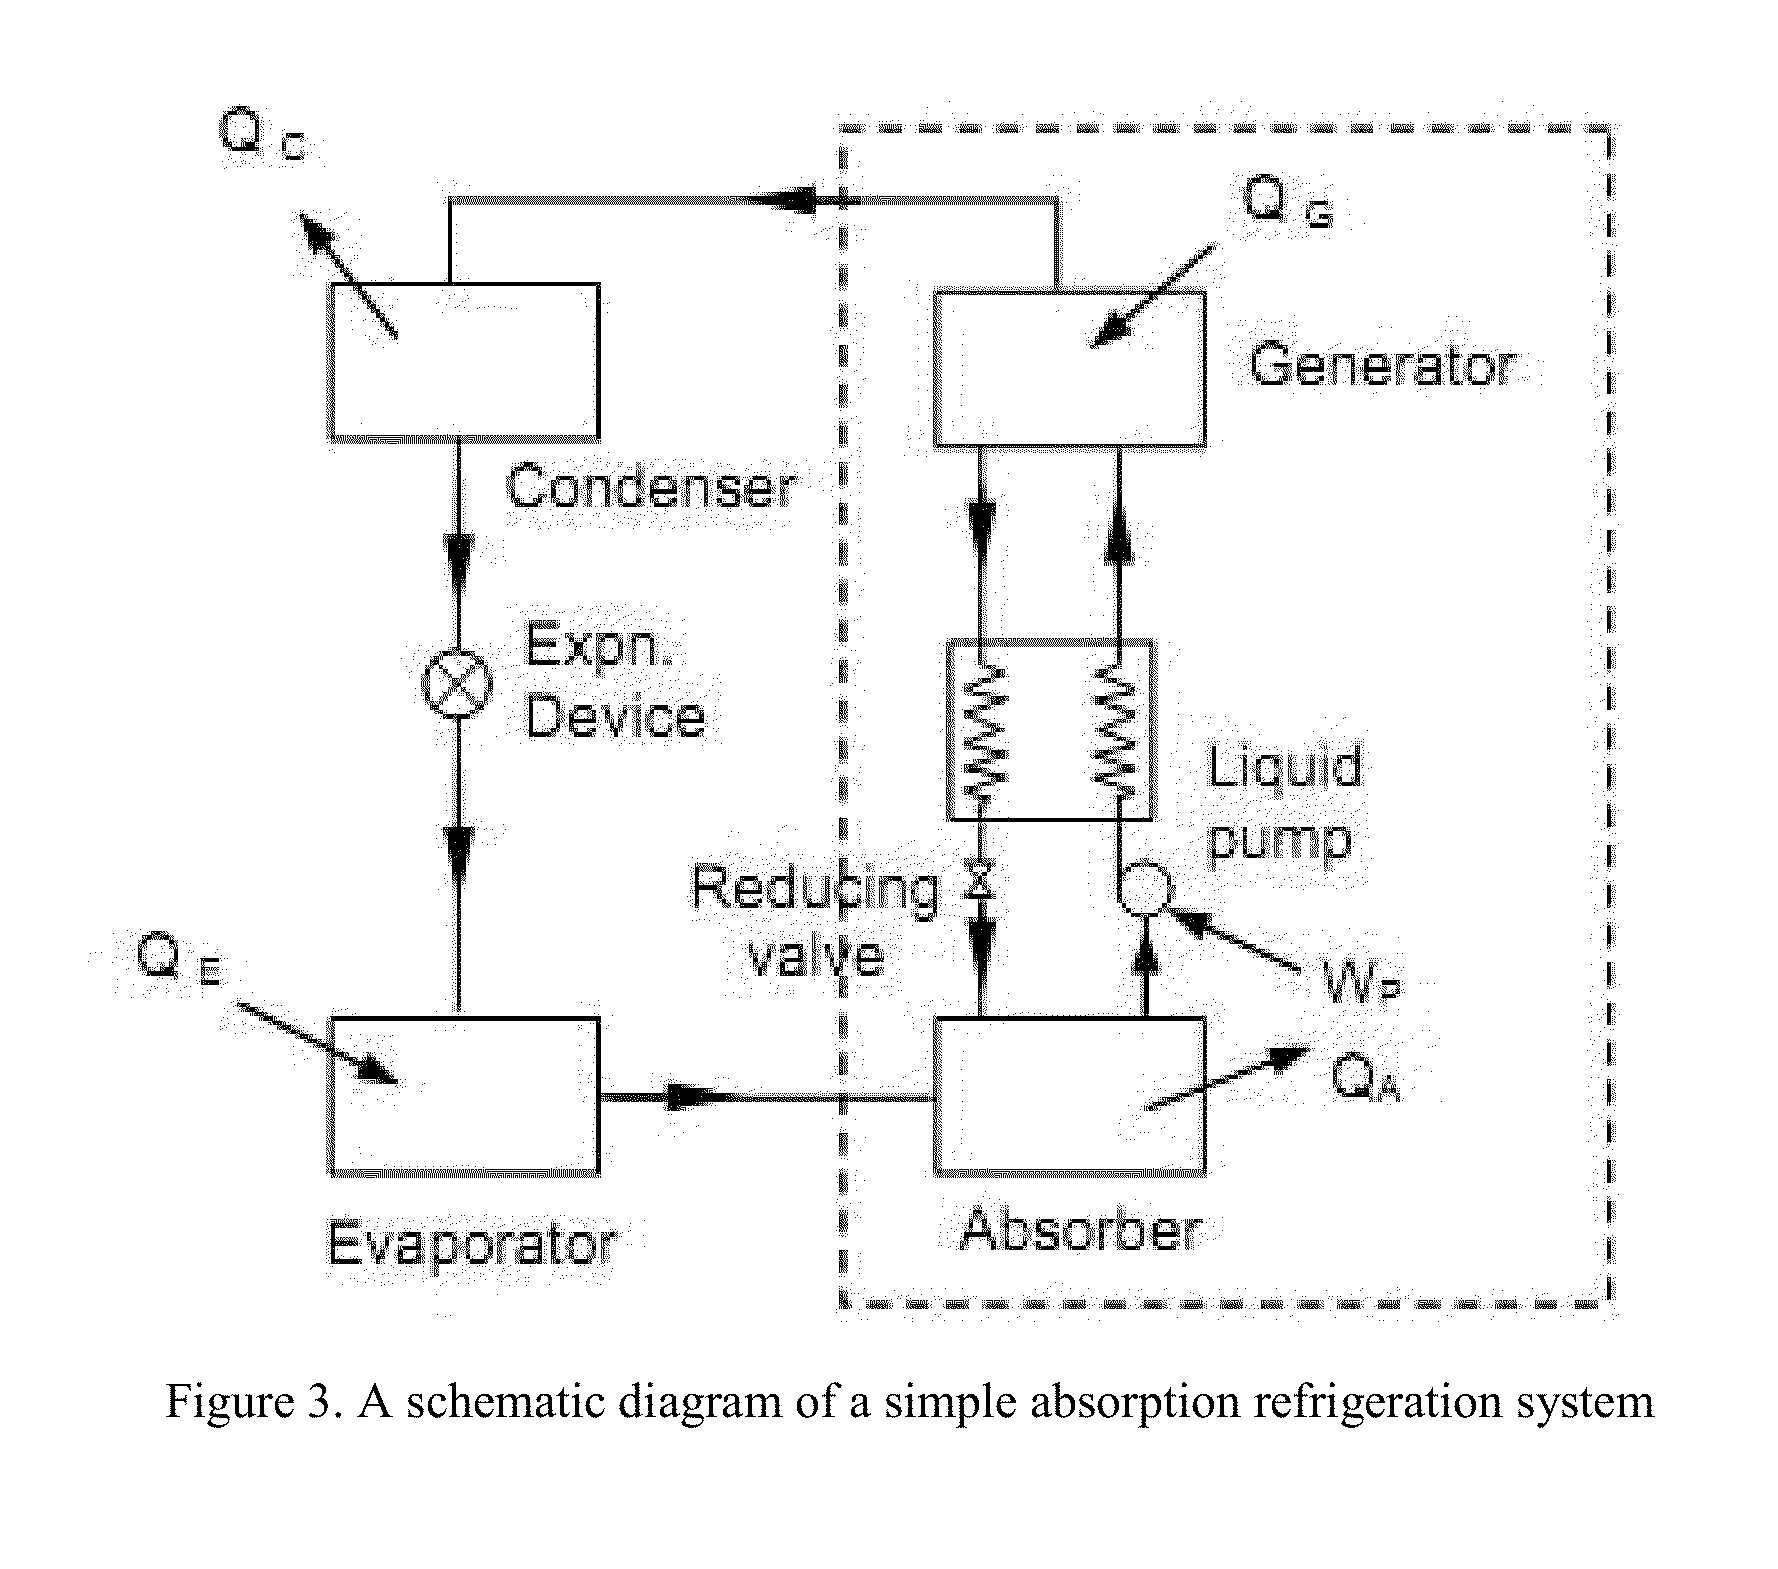 Refrigeration system with dual refrigerants and liquid working fluids